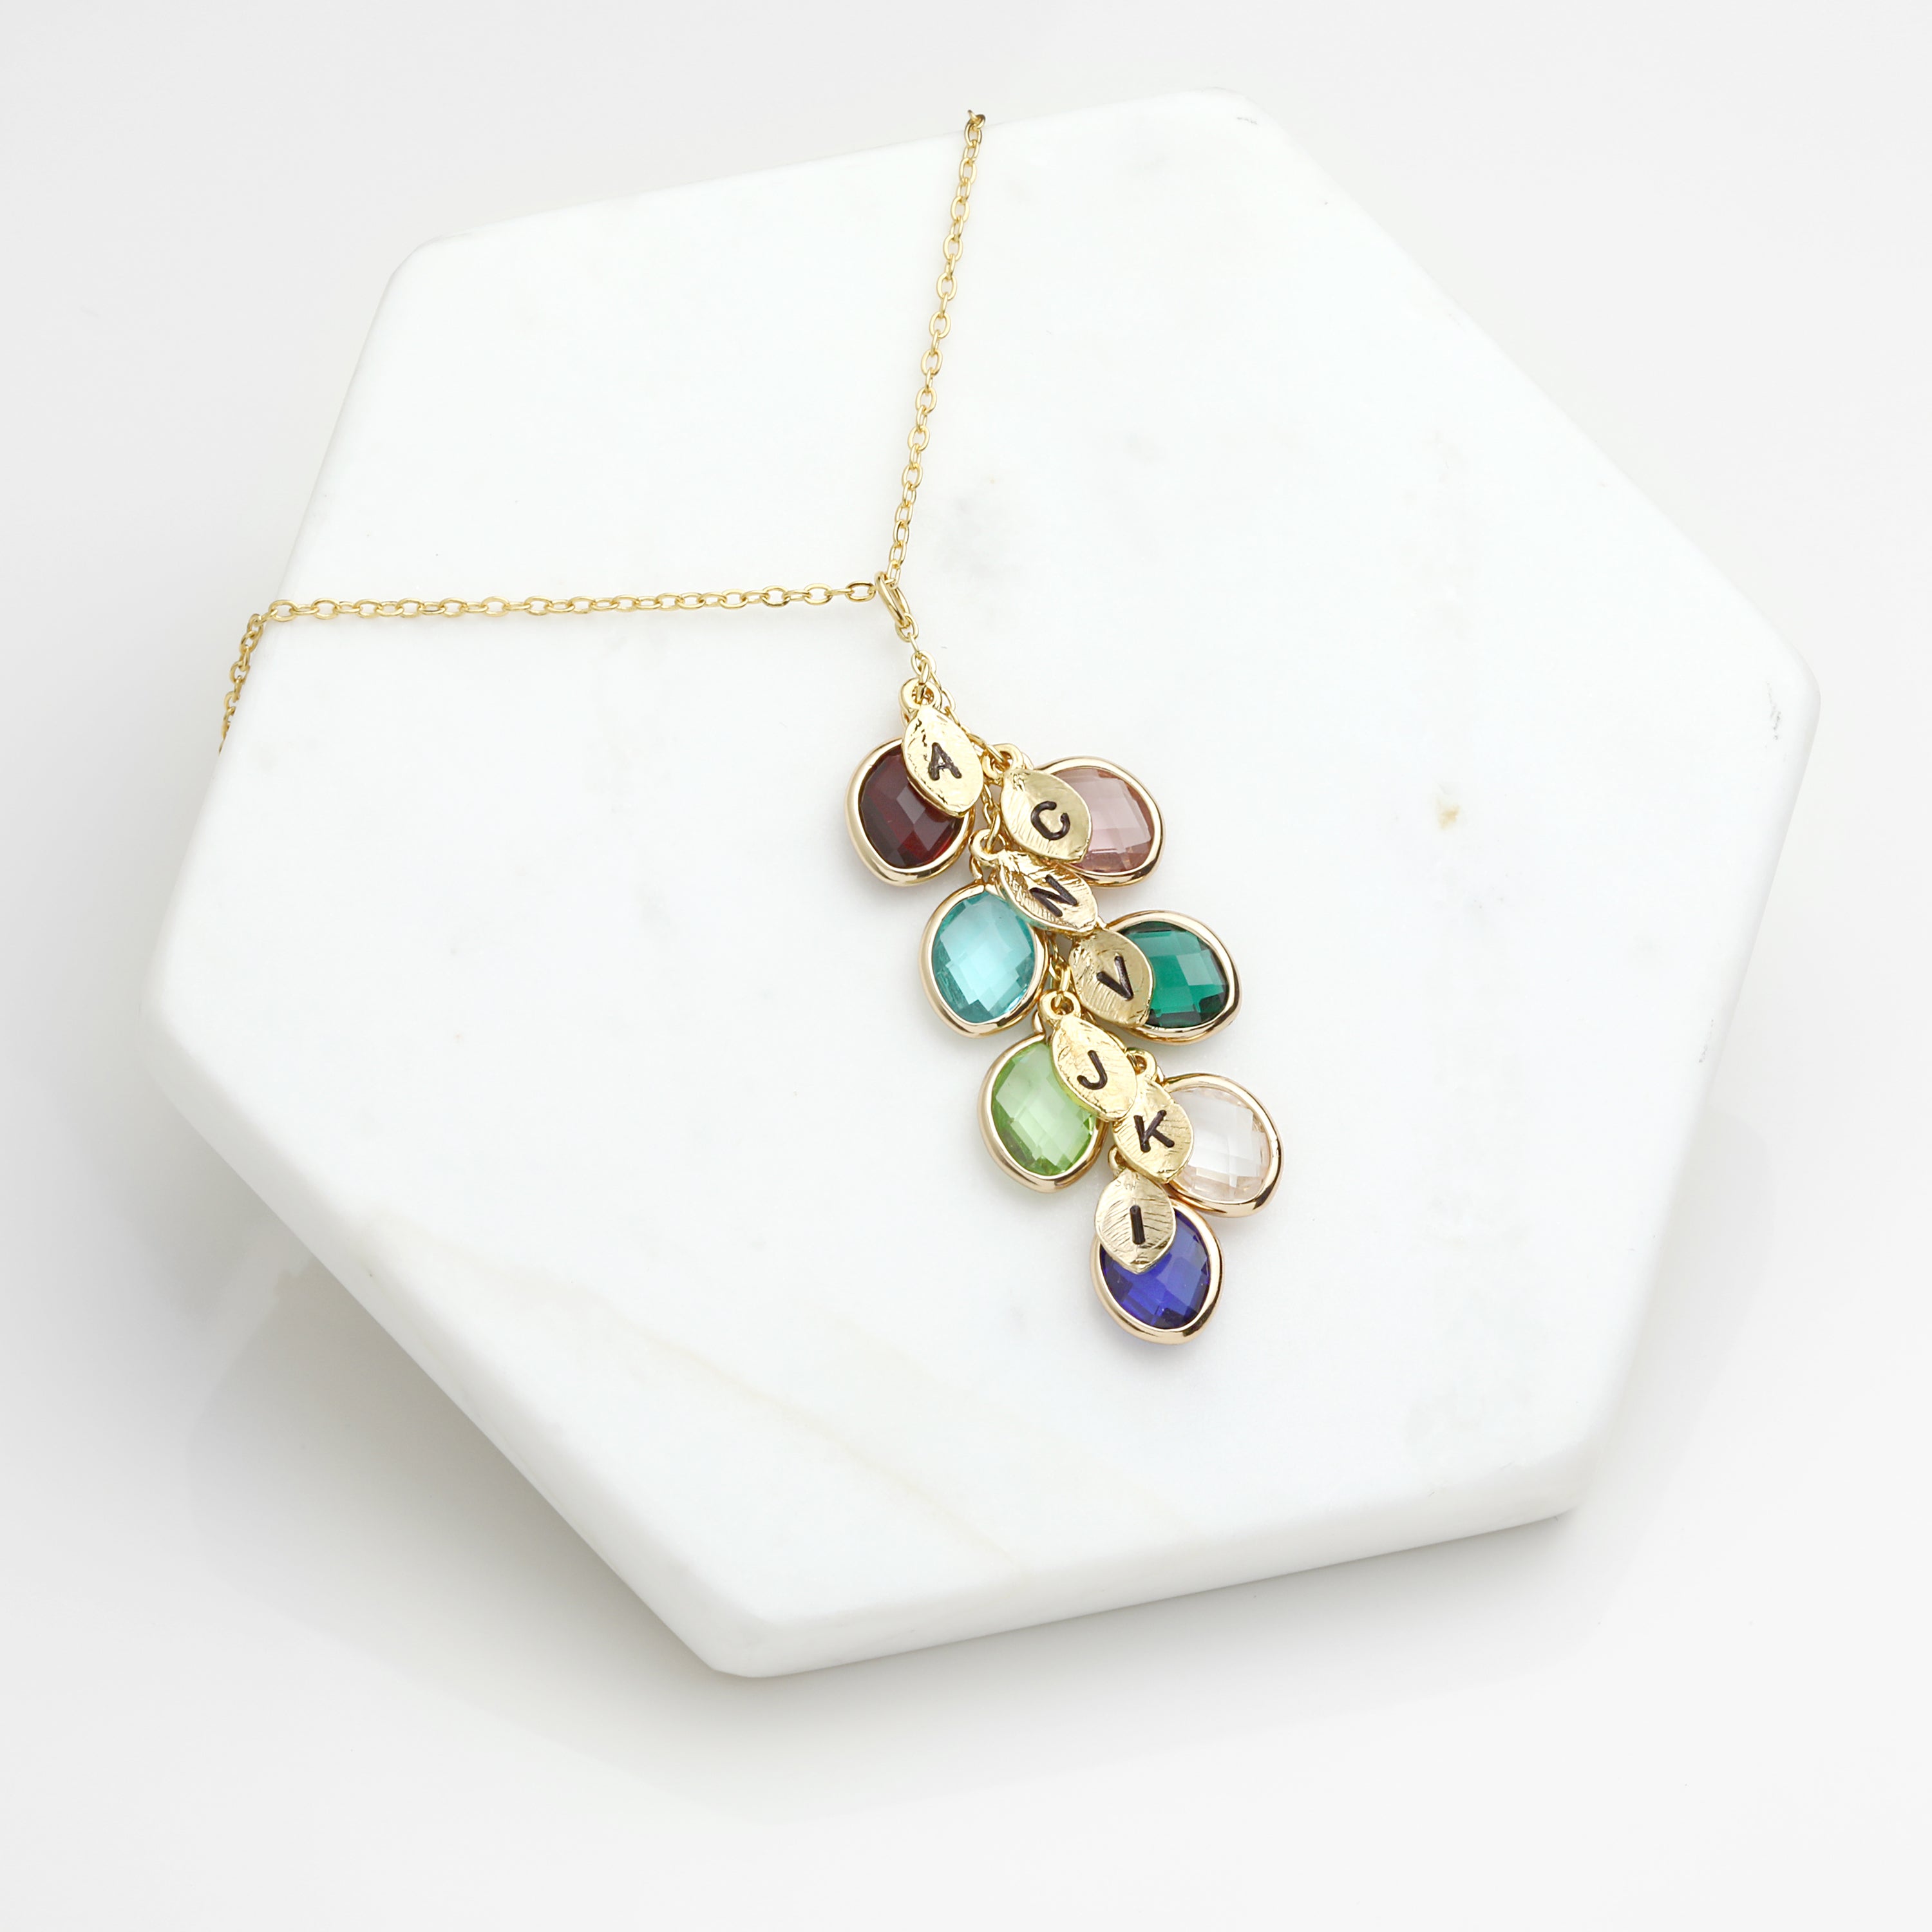 Personalized Grand 5 Connected Birthstone Necklace in 14k Gold